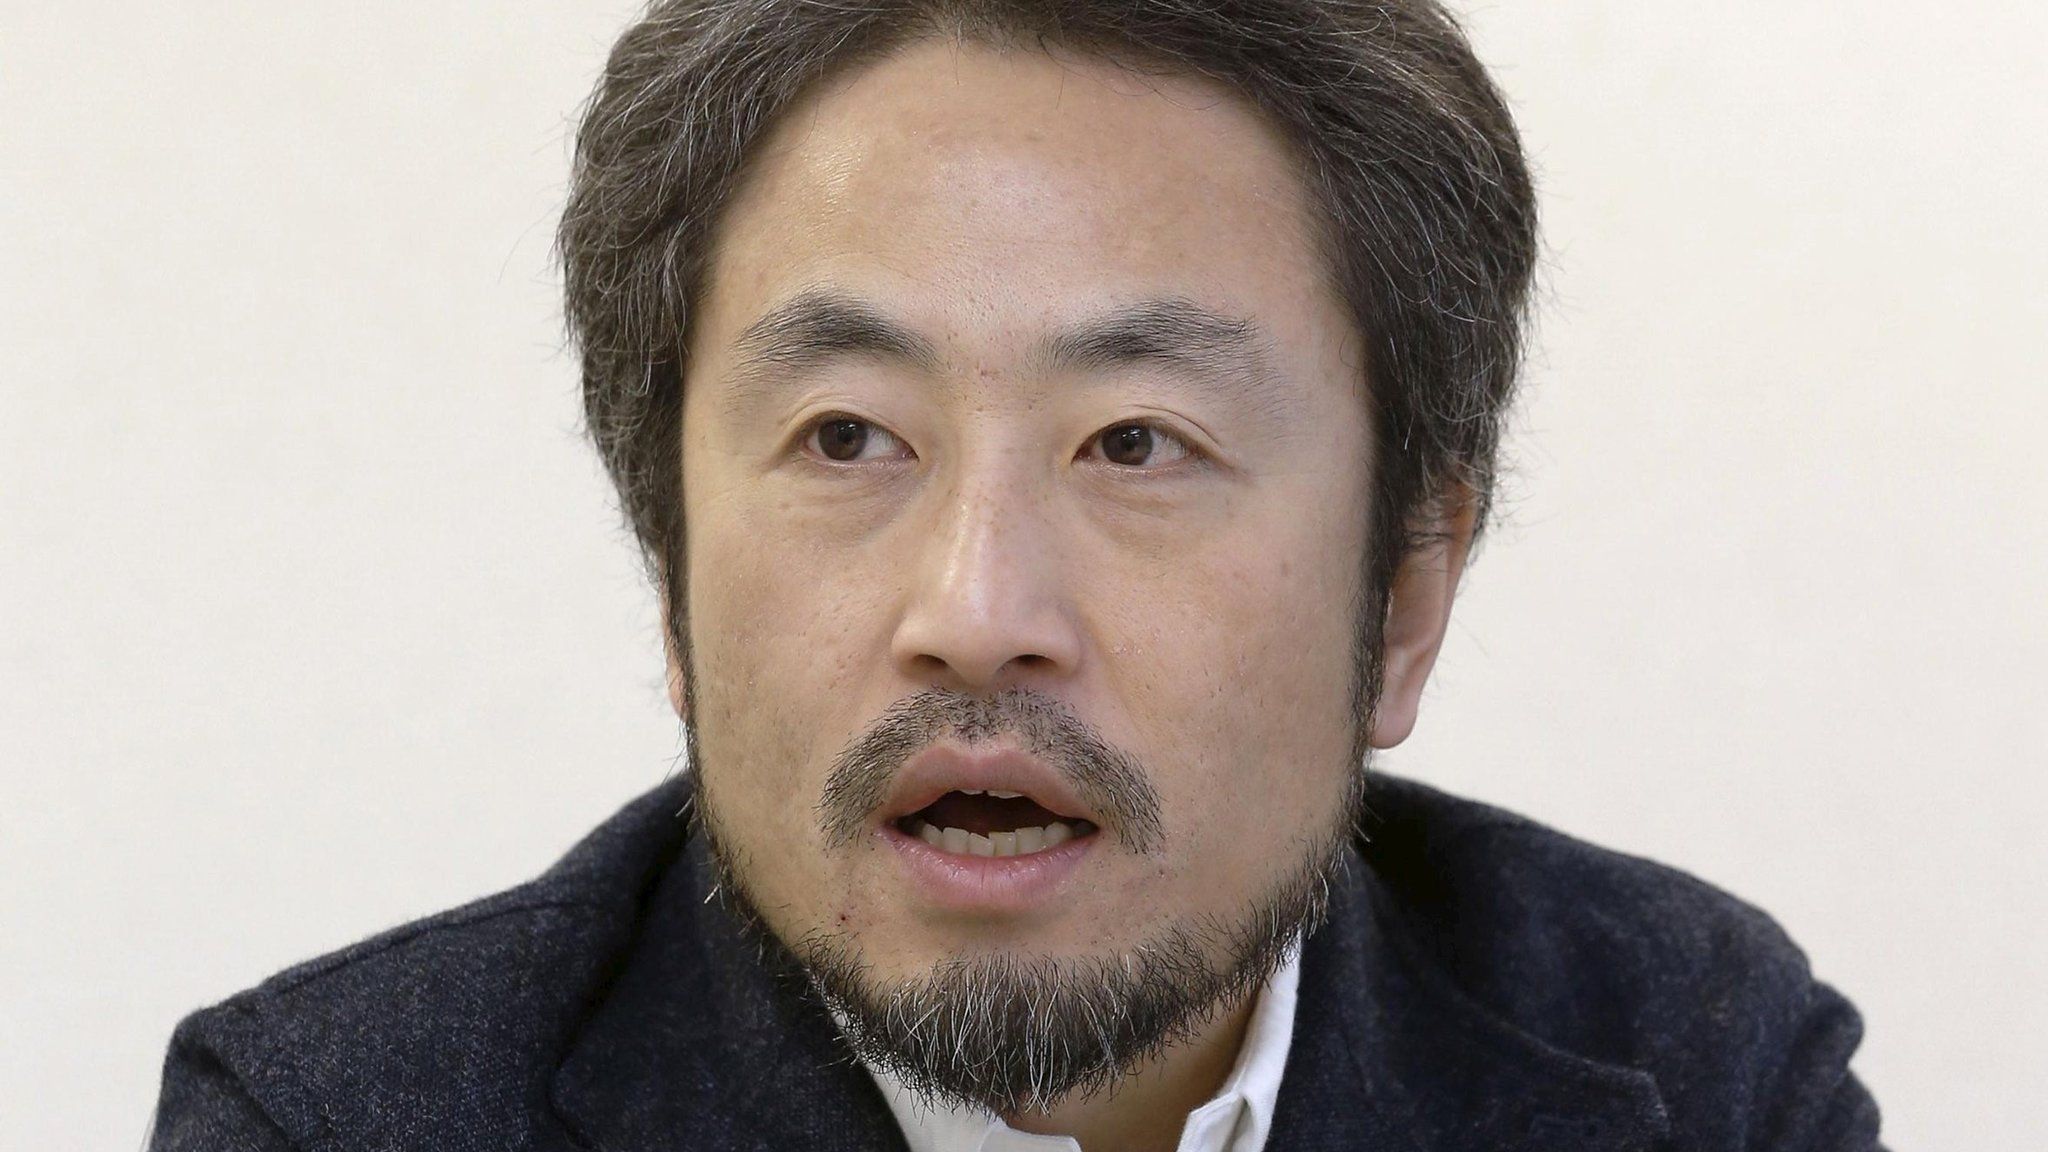 Japanese journalist Yasuda Jumpei speaks during an interview in Tokyo, in this photo taken by Kyodo in February 2015